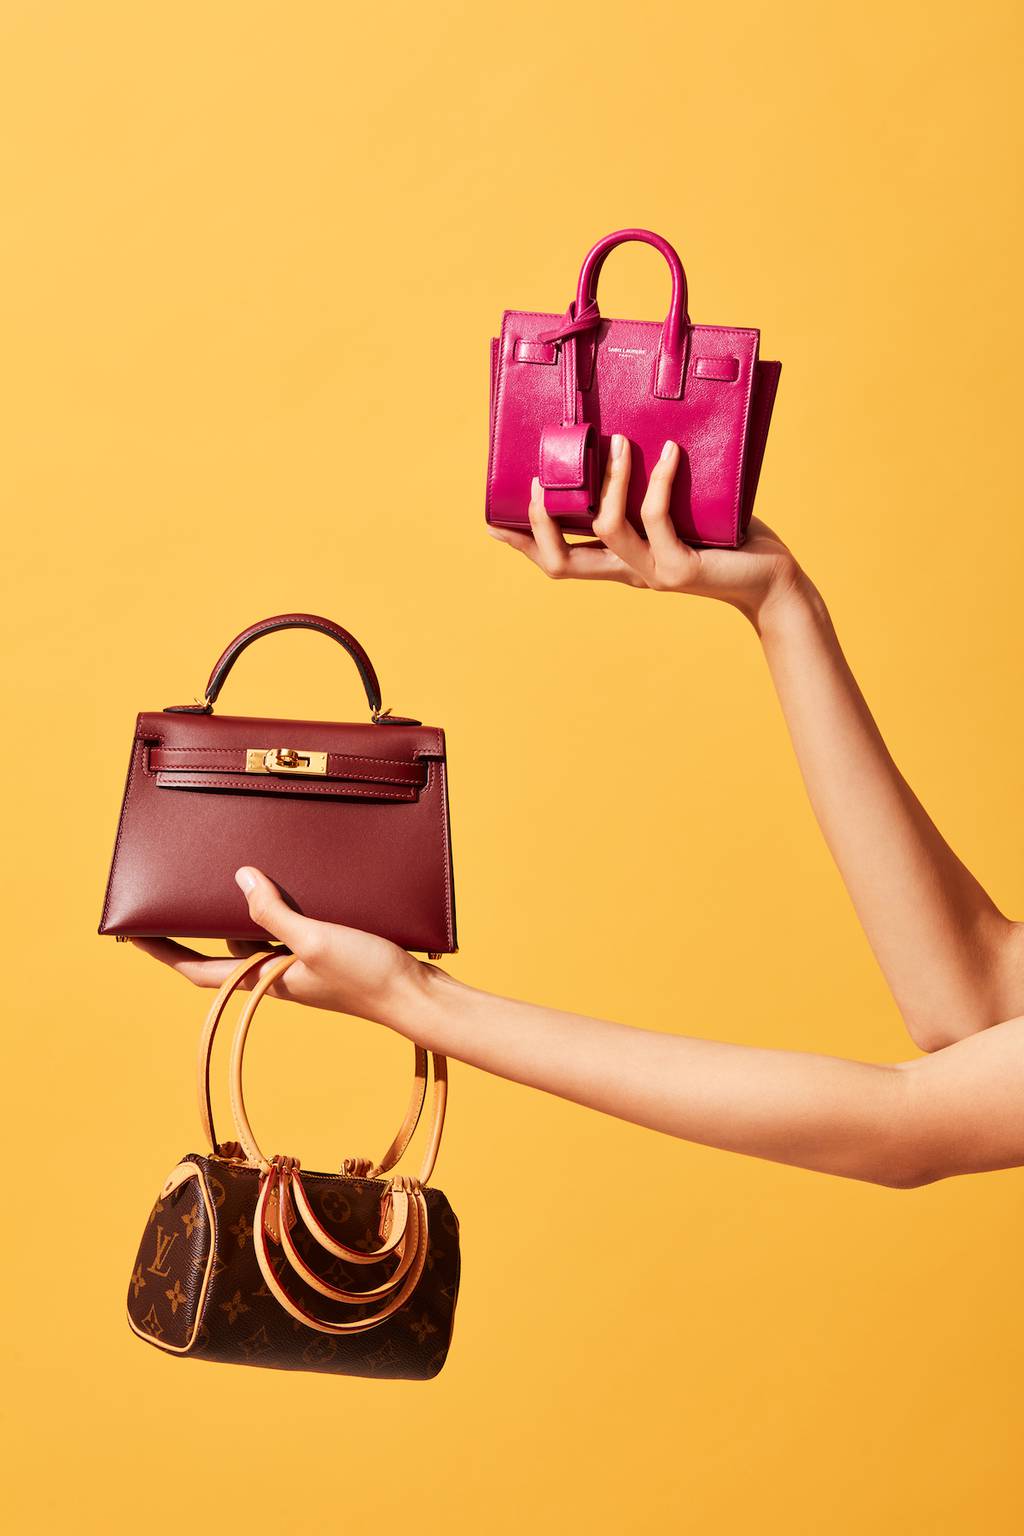 Two hands holding handbags by Louis Vuitton, Hermes and Saint Laurent.